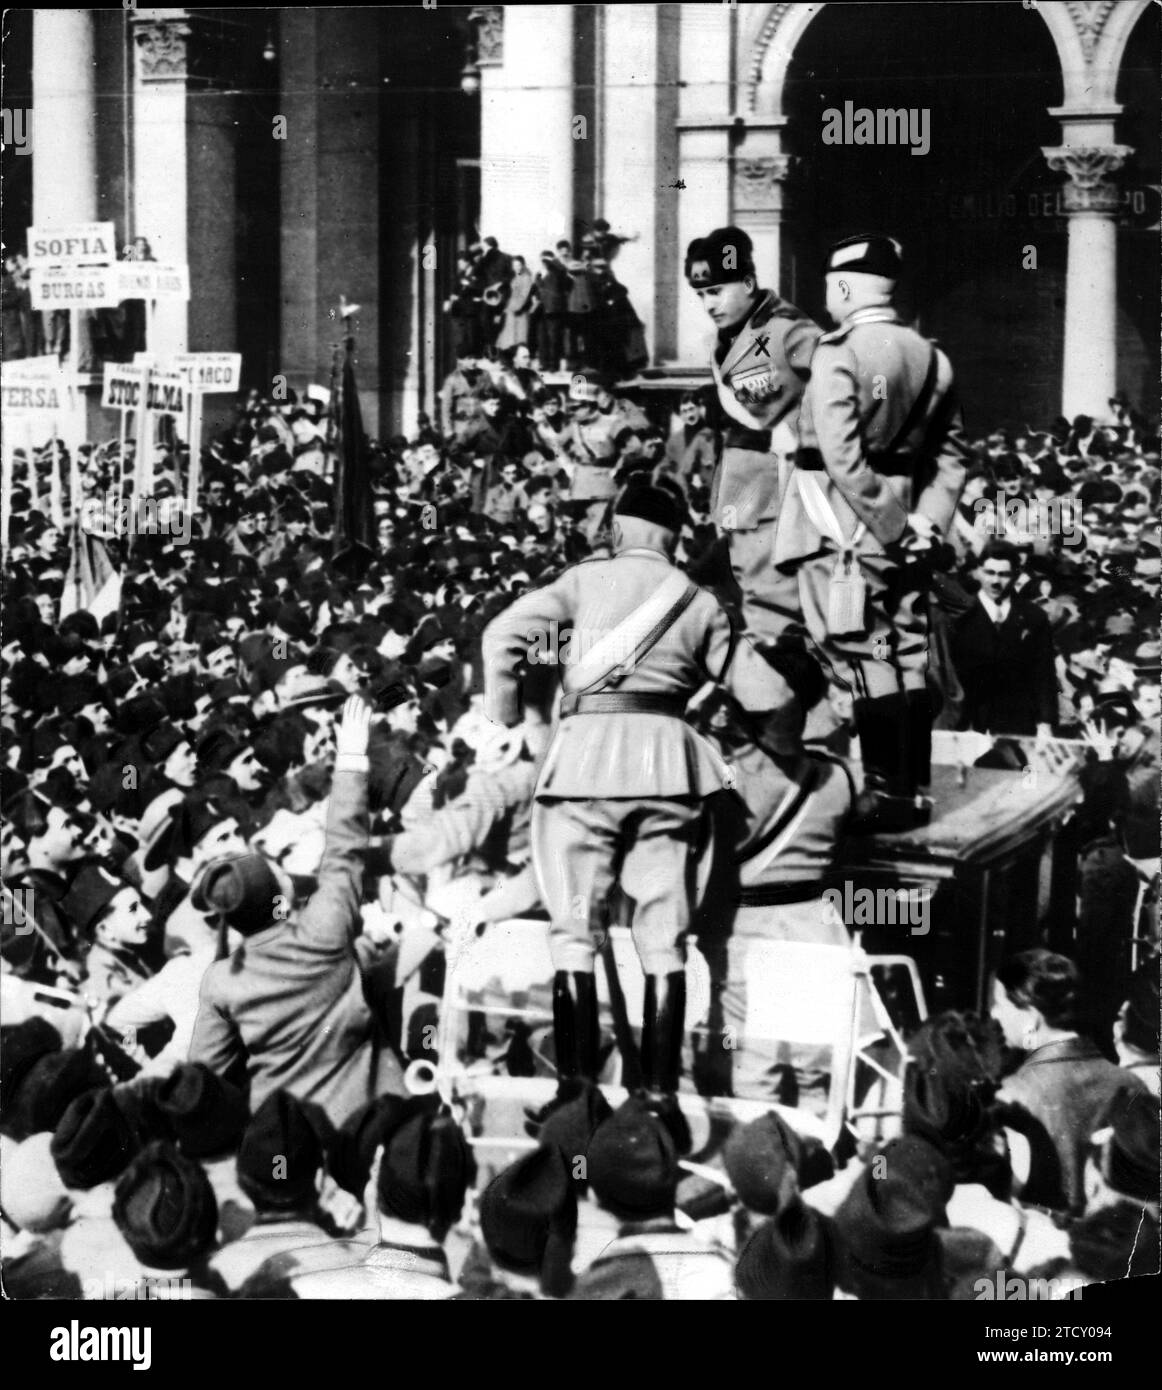 10/28/1925. The head of the Government, Benito Mussolini, gives a speech in the Piazza del Duomo in Milan during the demonstration held on the occasion of the third anniversary of the 'March on Rome'. Credit: Album / Archivo ABC / Vidal Stock Photo